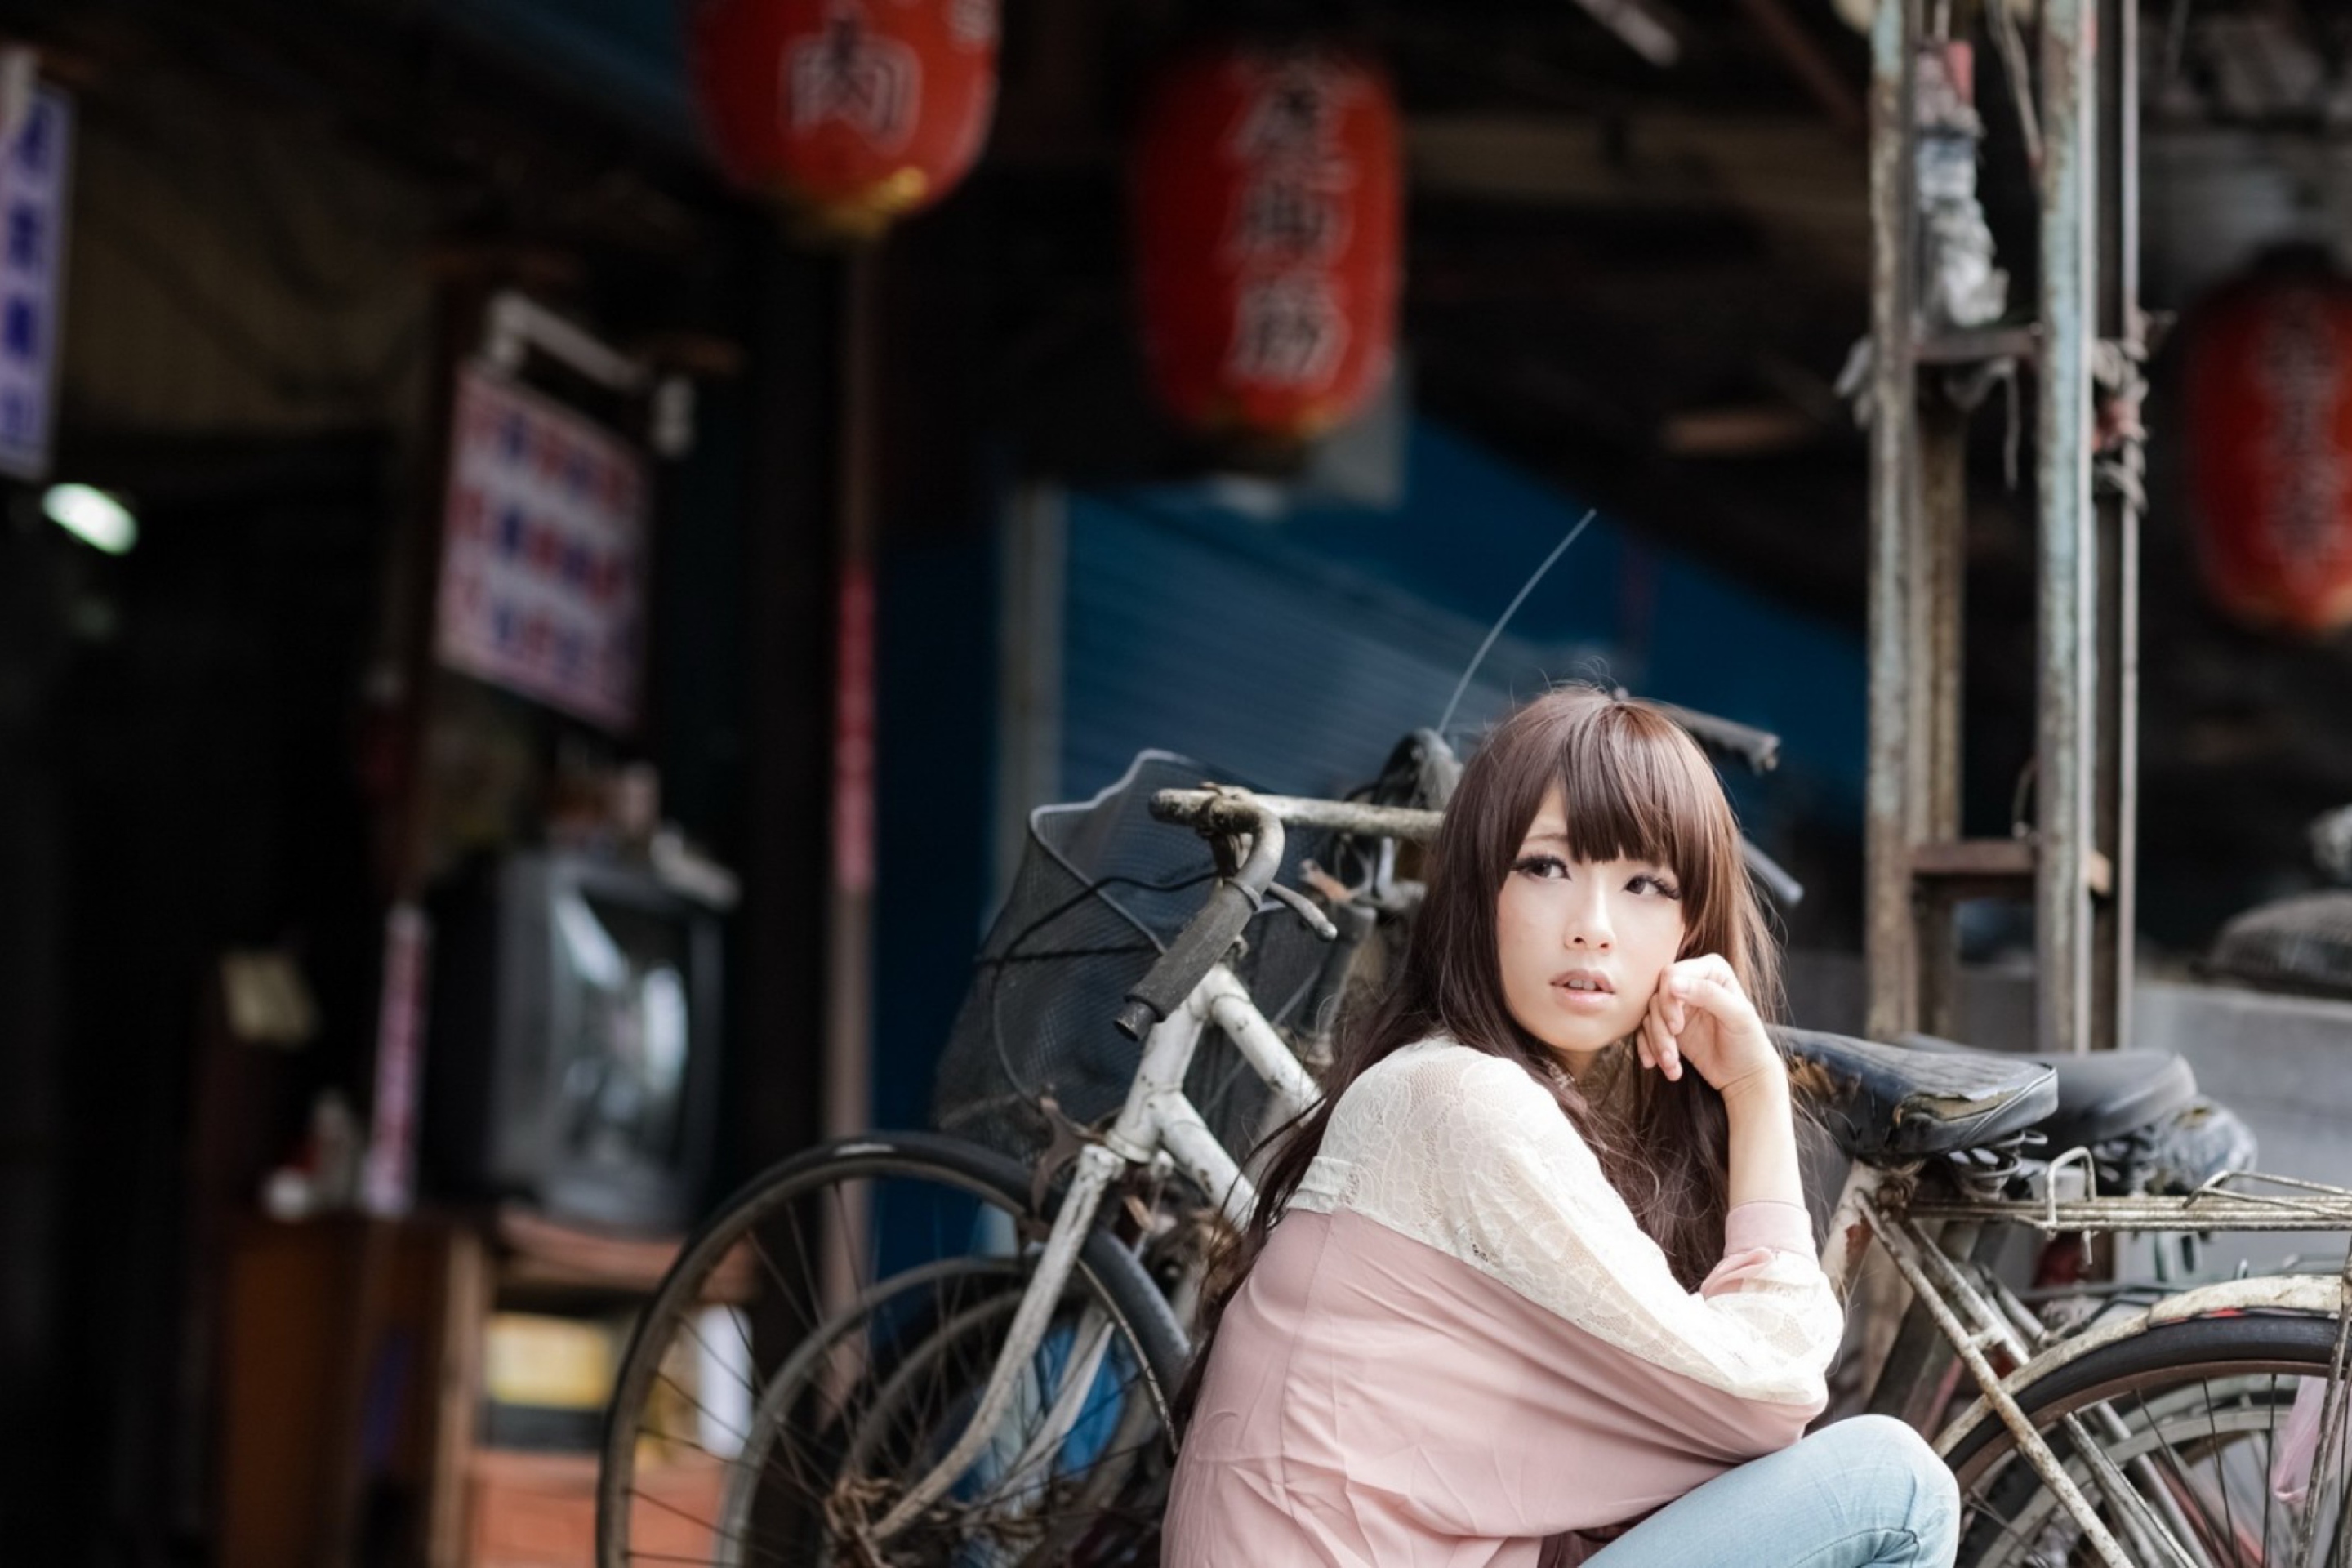 Cute Asian Girl With Bicycle wallpaper 2880x1920